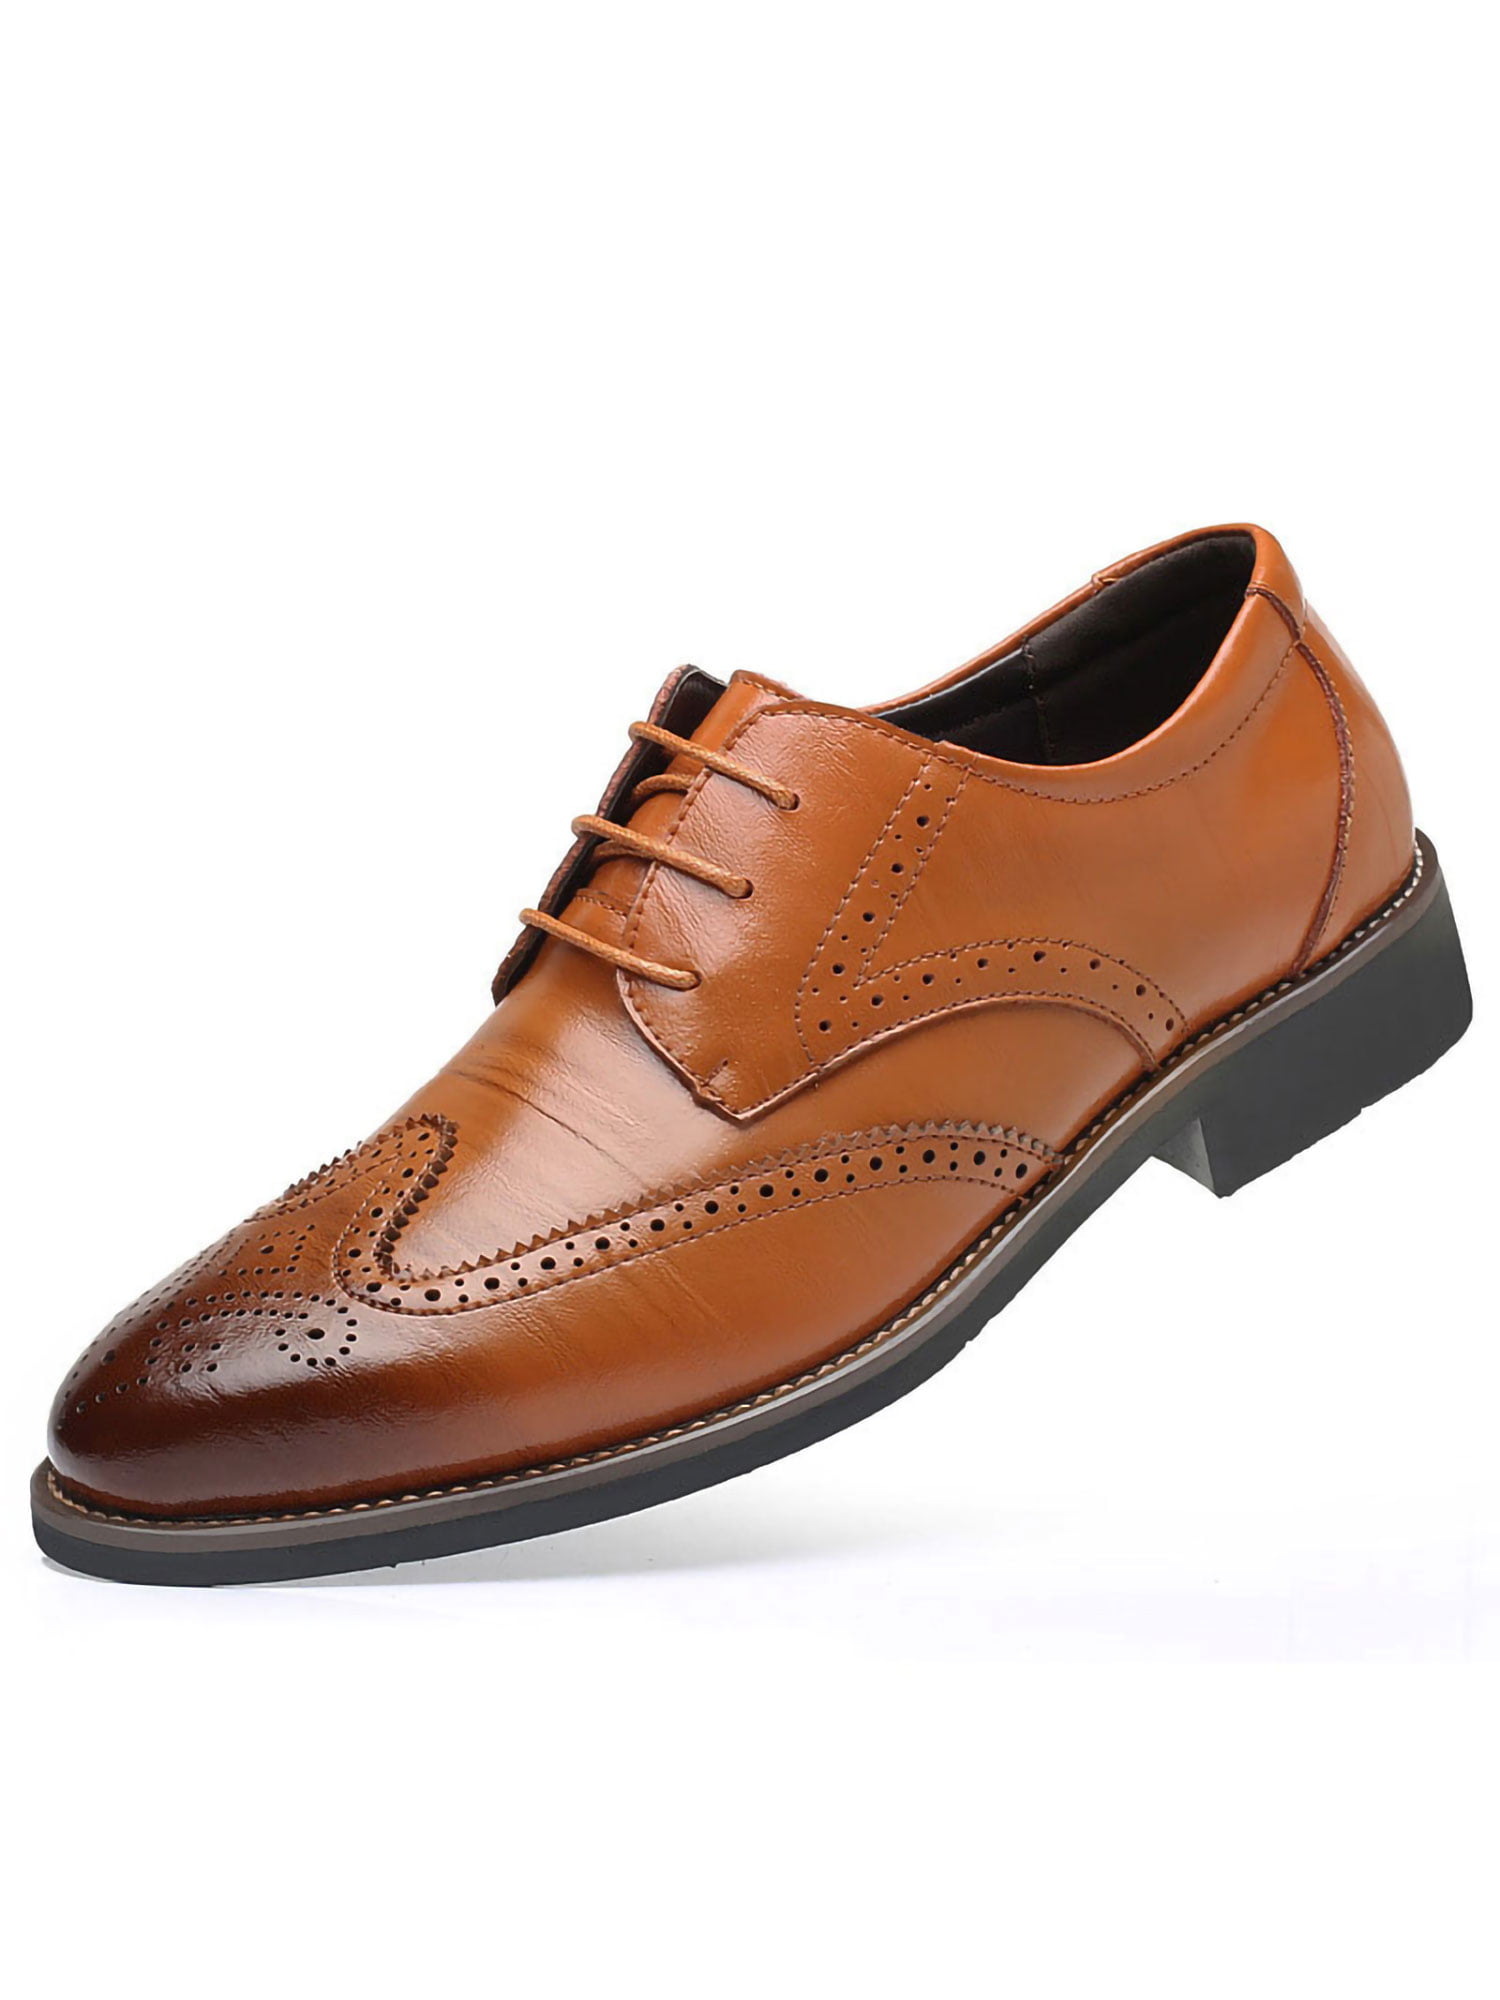 MENS FAUX LEATHER BROGUE SHOES SMART WEDDING ITALIAN FORMAL OFFICE DRESS SHOES 